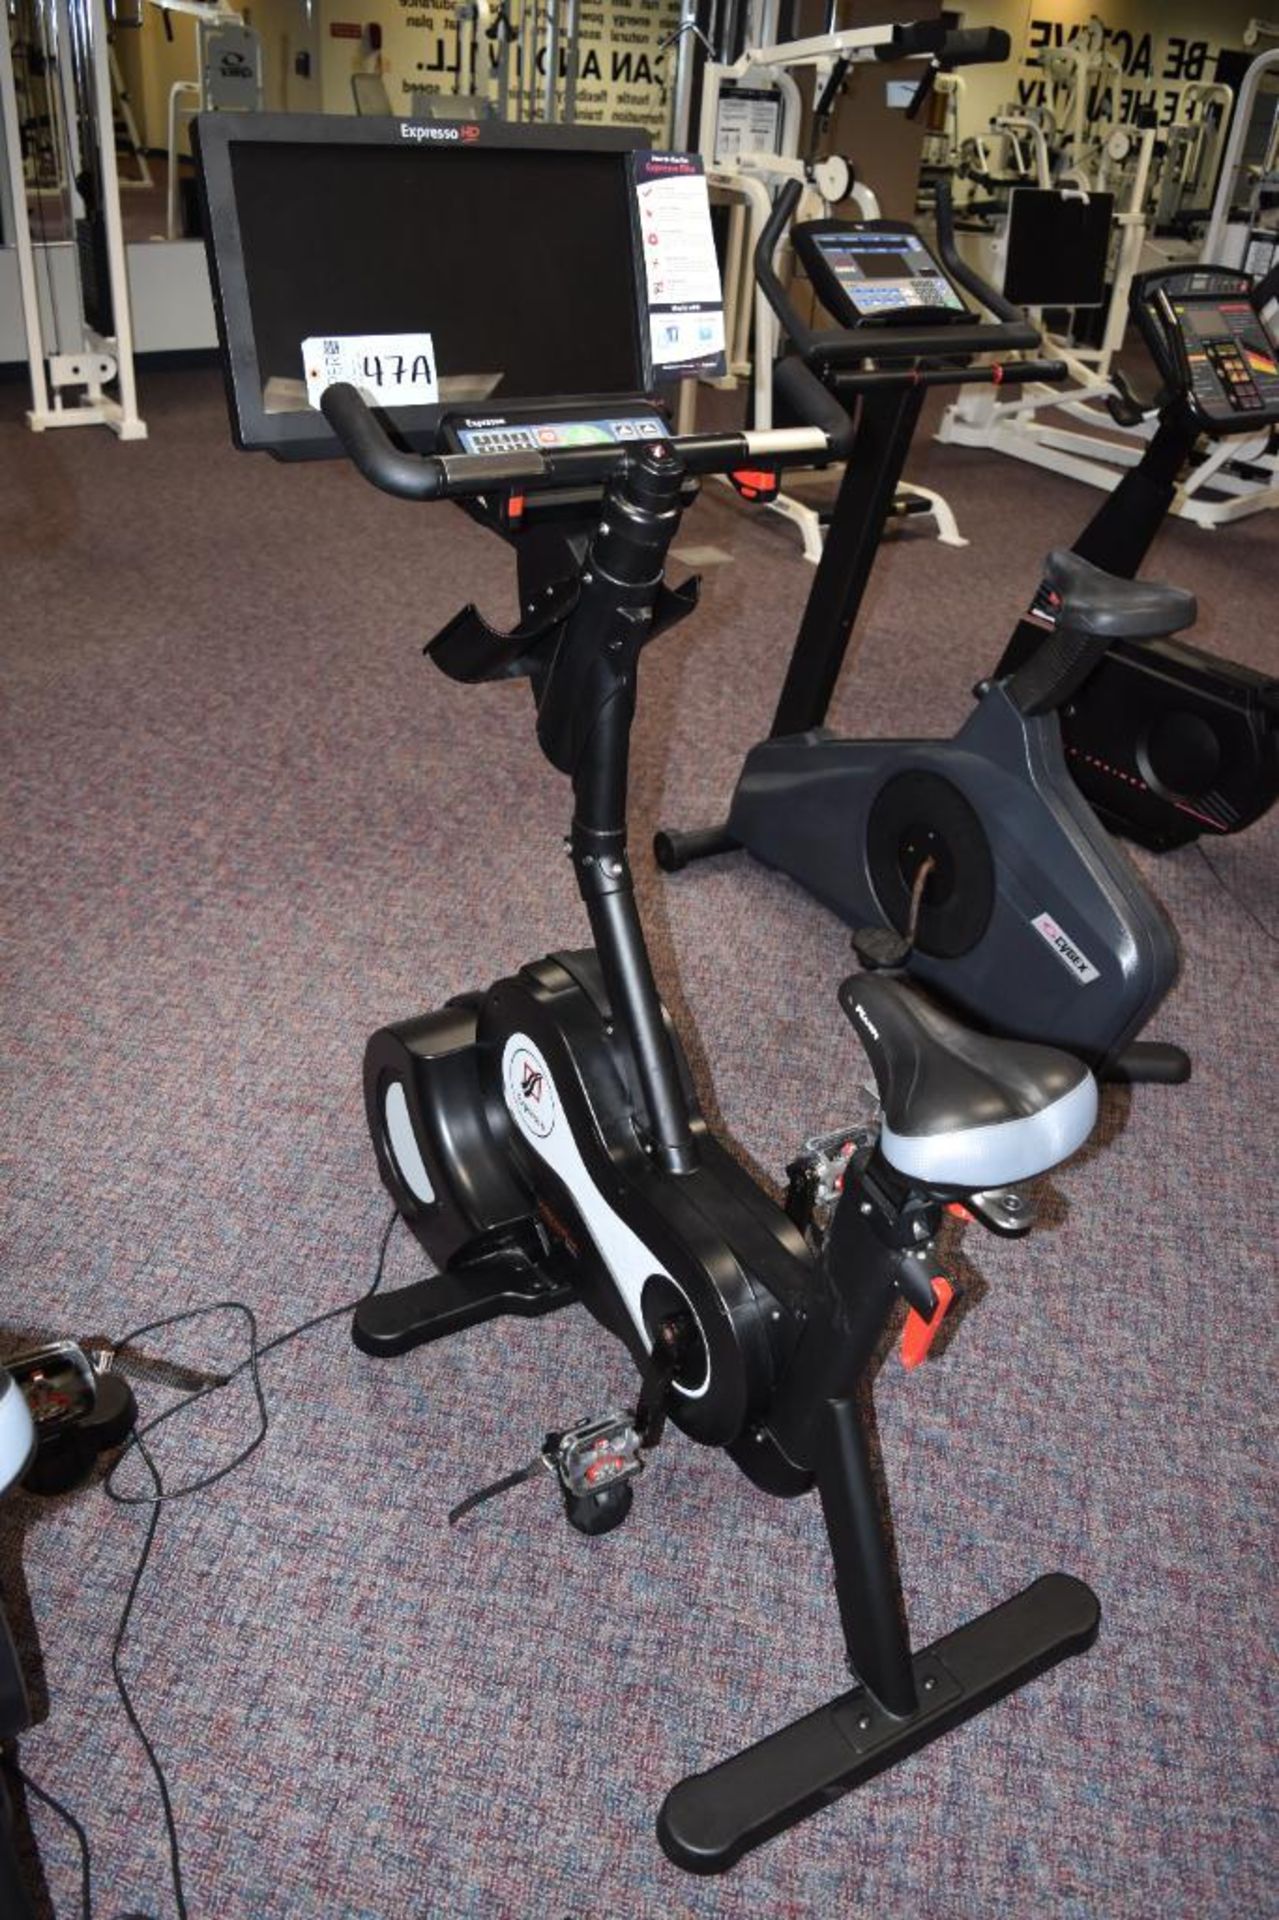 Interactive Fitness Expresso HD S3 Series Exercise Bicycle Trainer - Image 7 of 8